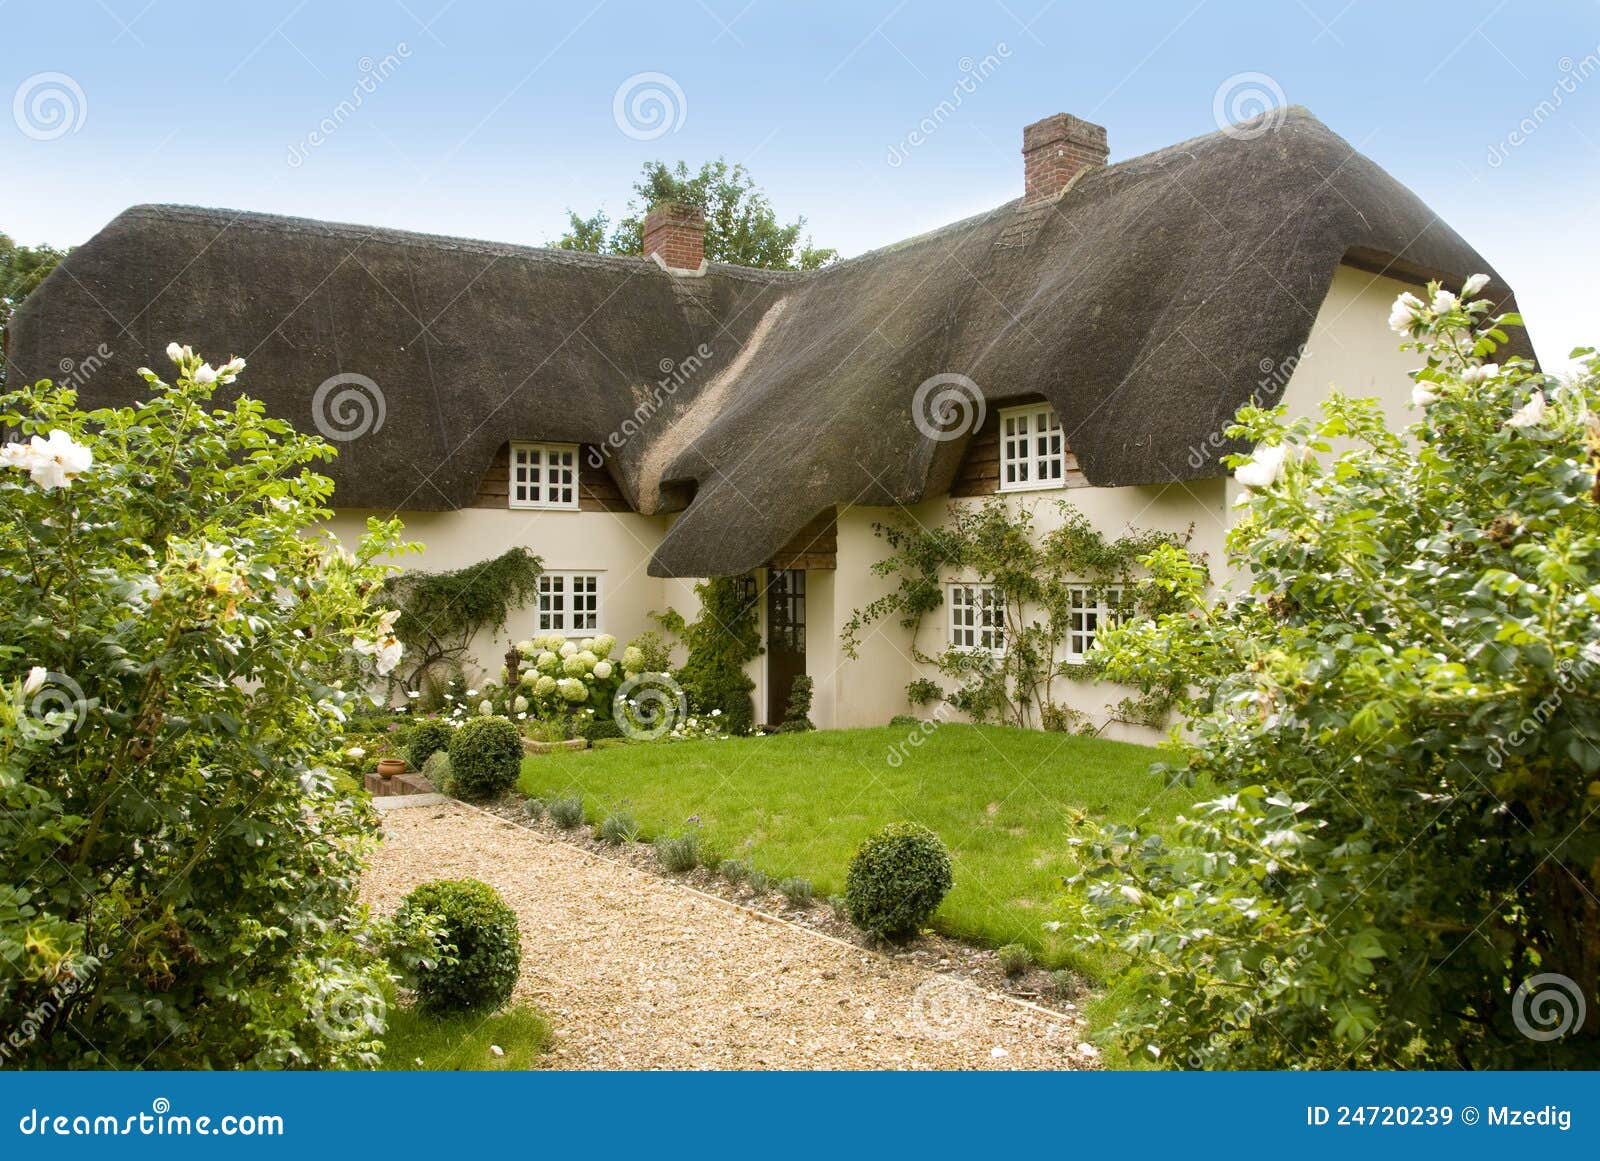 http://thumbs.dreamstime.com/z/traditional-english-thatched-country-cottage-24720239.jpg